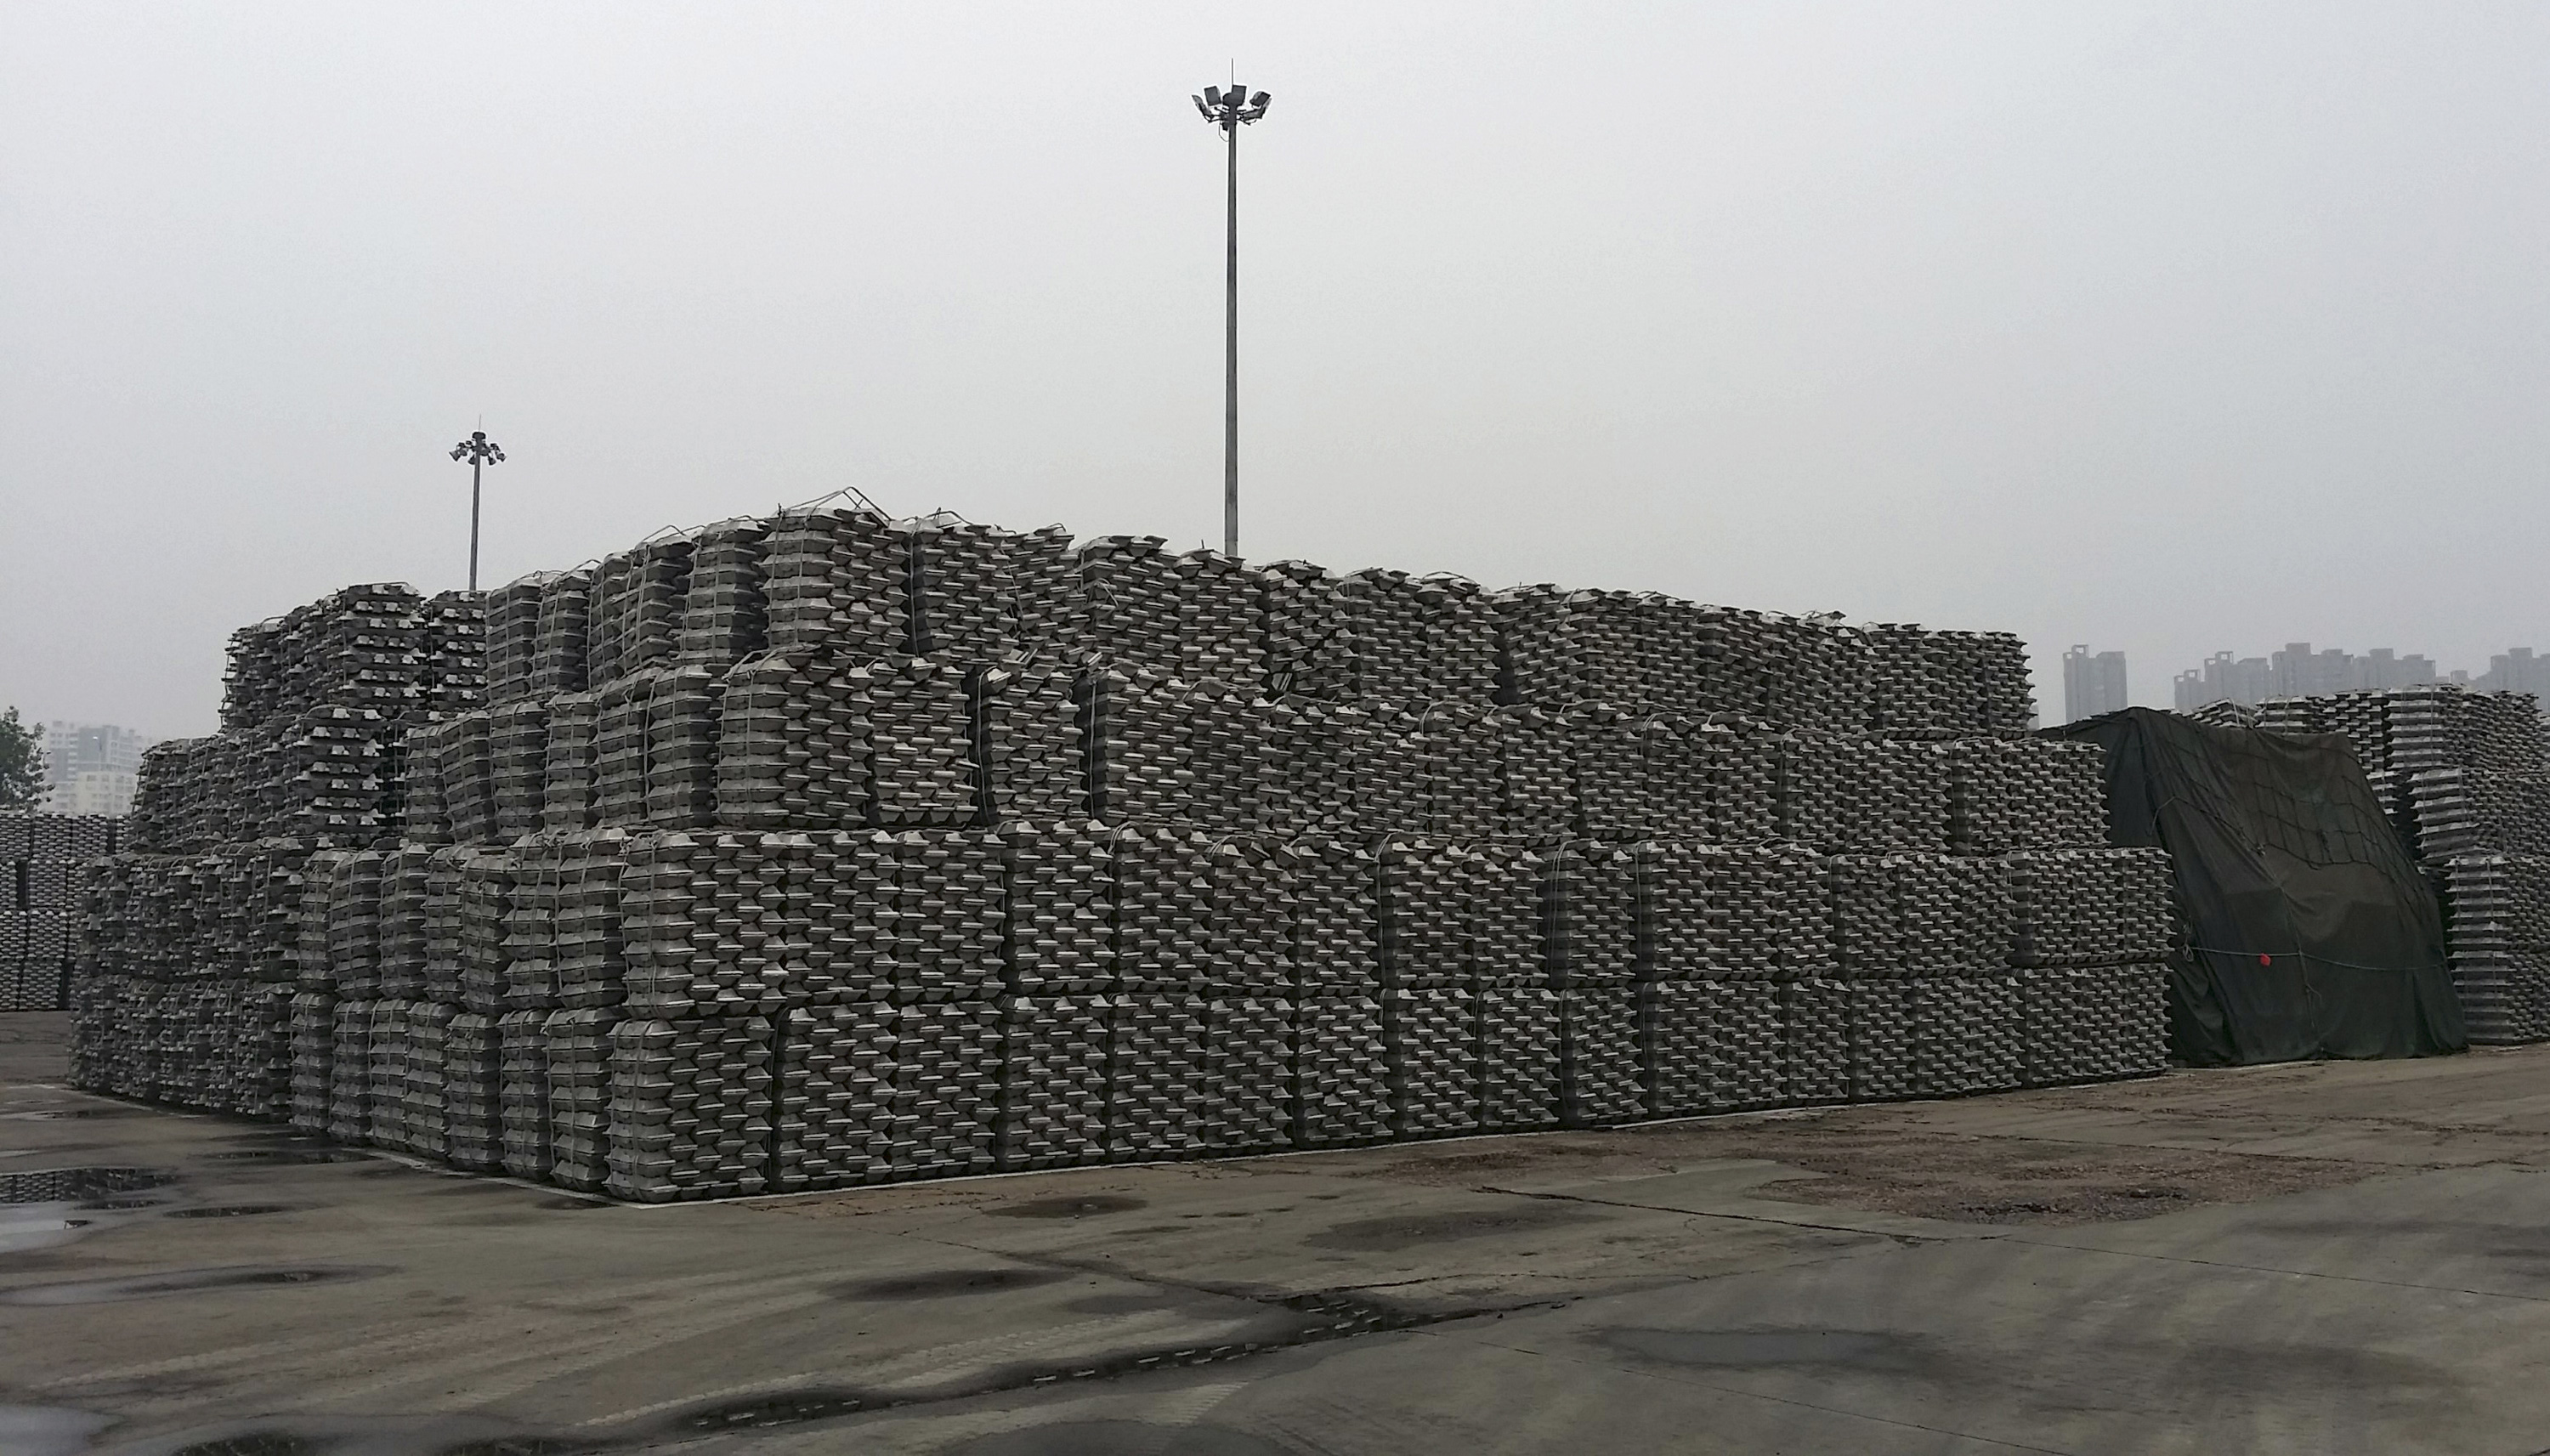 Aluminum ingots are piled up at a bonded storage area at the Dagang Terminal of Qingdao Port